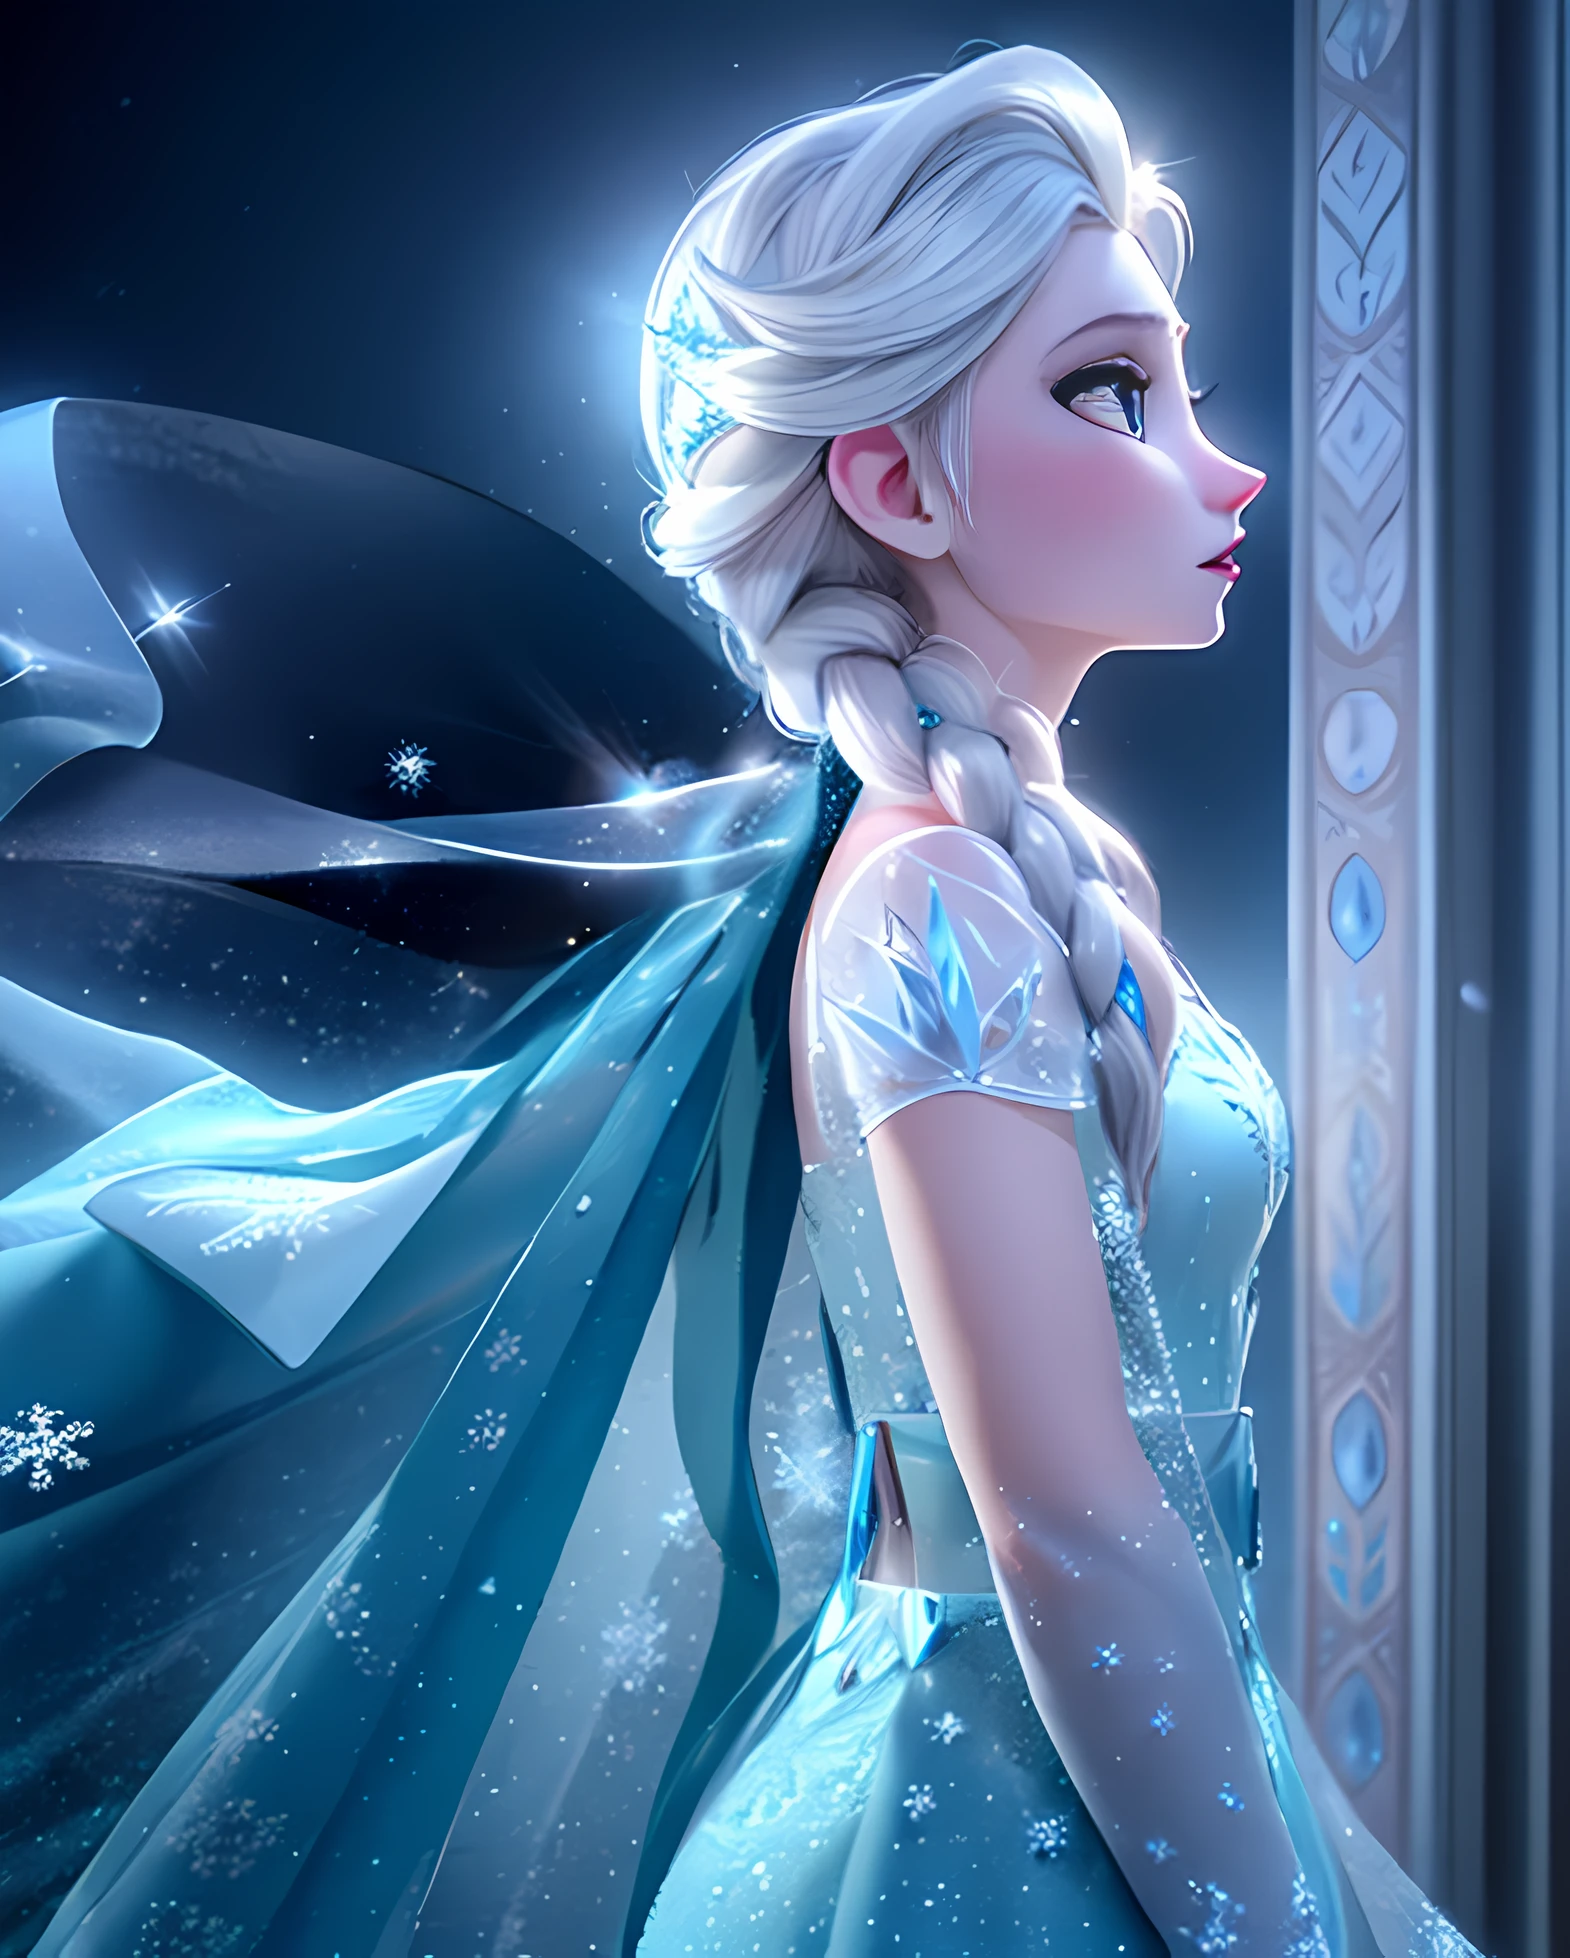 "Elsa, the queen of Arendelle, standing in a snowy landscape with her ice powers in full display. She has a regal presence, wearing a stunning ice-blue gown and a flowing cape. Captivate the magic and elegance of her character, emphasizing her powerful and mesmerizing ice sculptures. Illuminate the scene with a soft, ethereal glow, highlighting the intricate details of the ice formations. Create a sense of wonder and enchantment, with sparkling snowflakes gently falling around her. Let her hair shimmer with an icy blue hue, and capture the determination and strength in her eyes. Ensure the image is of the highest quality, with stunning clarity and depth. Craft a masterpiece that truly captures the essence of Elsa and the beauty of her icy kingdom."